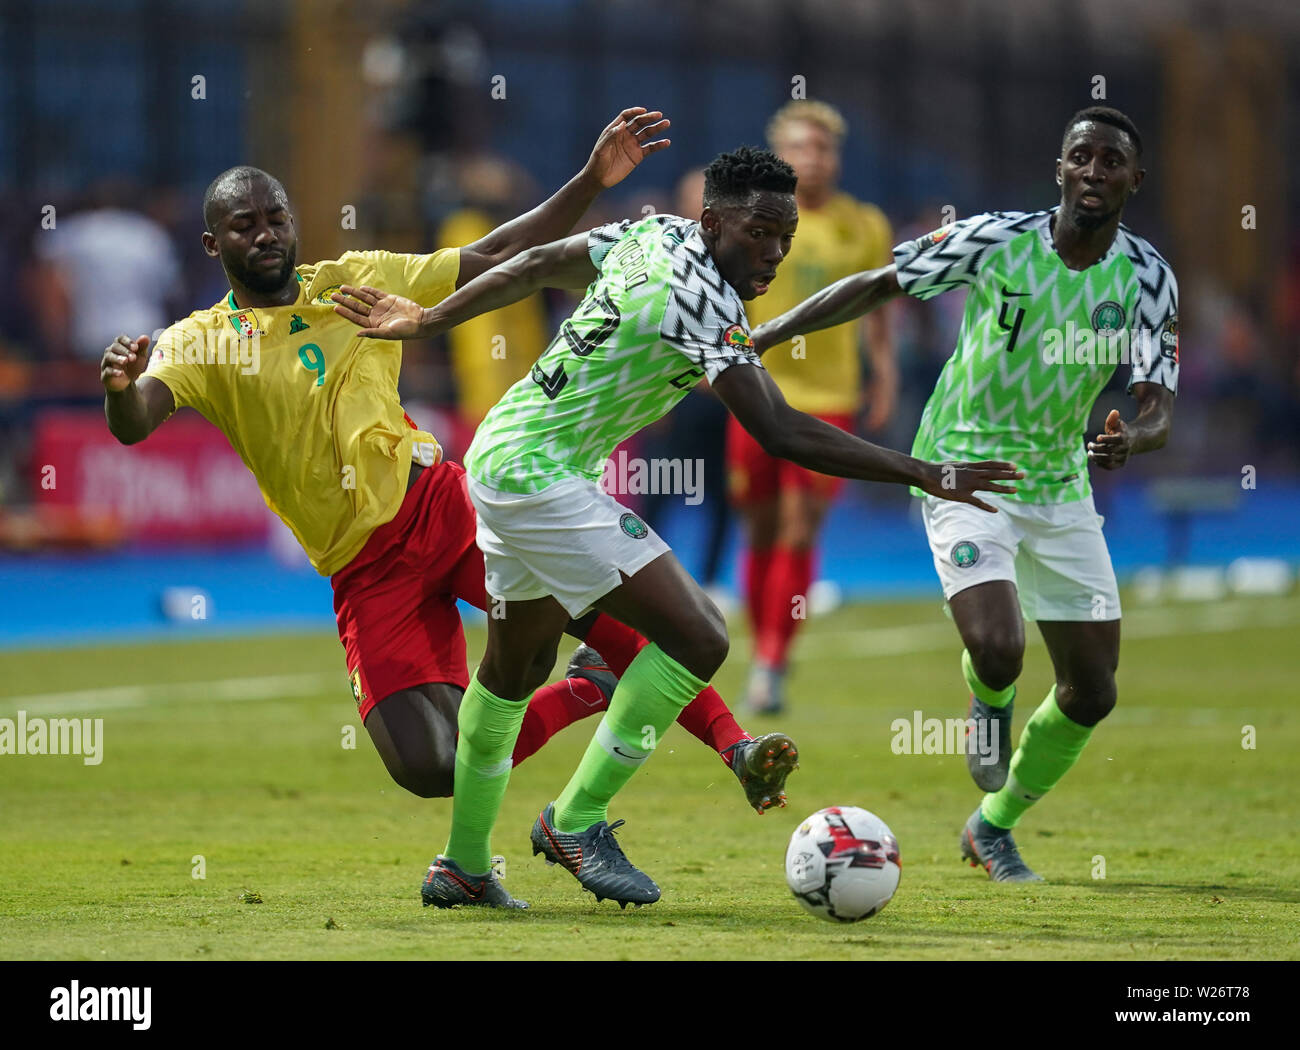 Alexandria, Egypt. 6th July 2019. FRANCE OUT July 6, 2019: Stephane Cedric Bahoken of Cameroon and Kenneth Josiah omeruo of Nigeria challenging for the ball during the 2019 African Cup of Nations match between Cameroon and Nigeria at the Alexanddria Stadium in Alexandria, Egypt. Ulrik Pedersen/CSM. Stock Photo